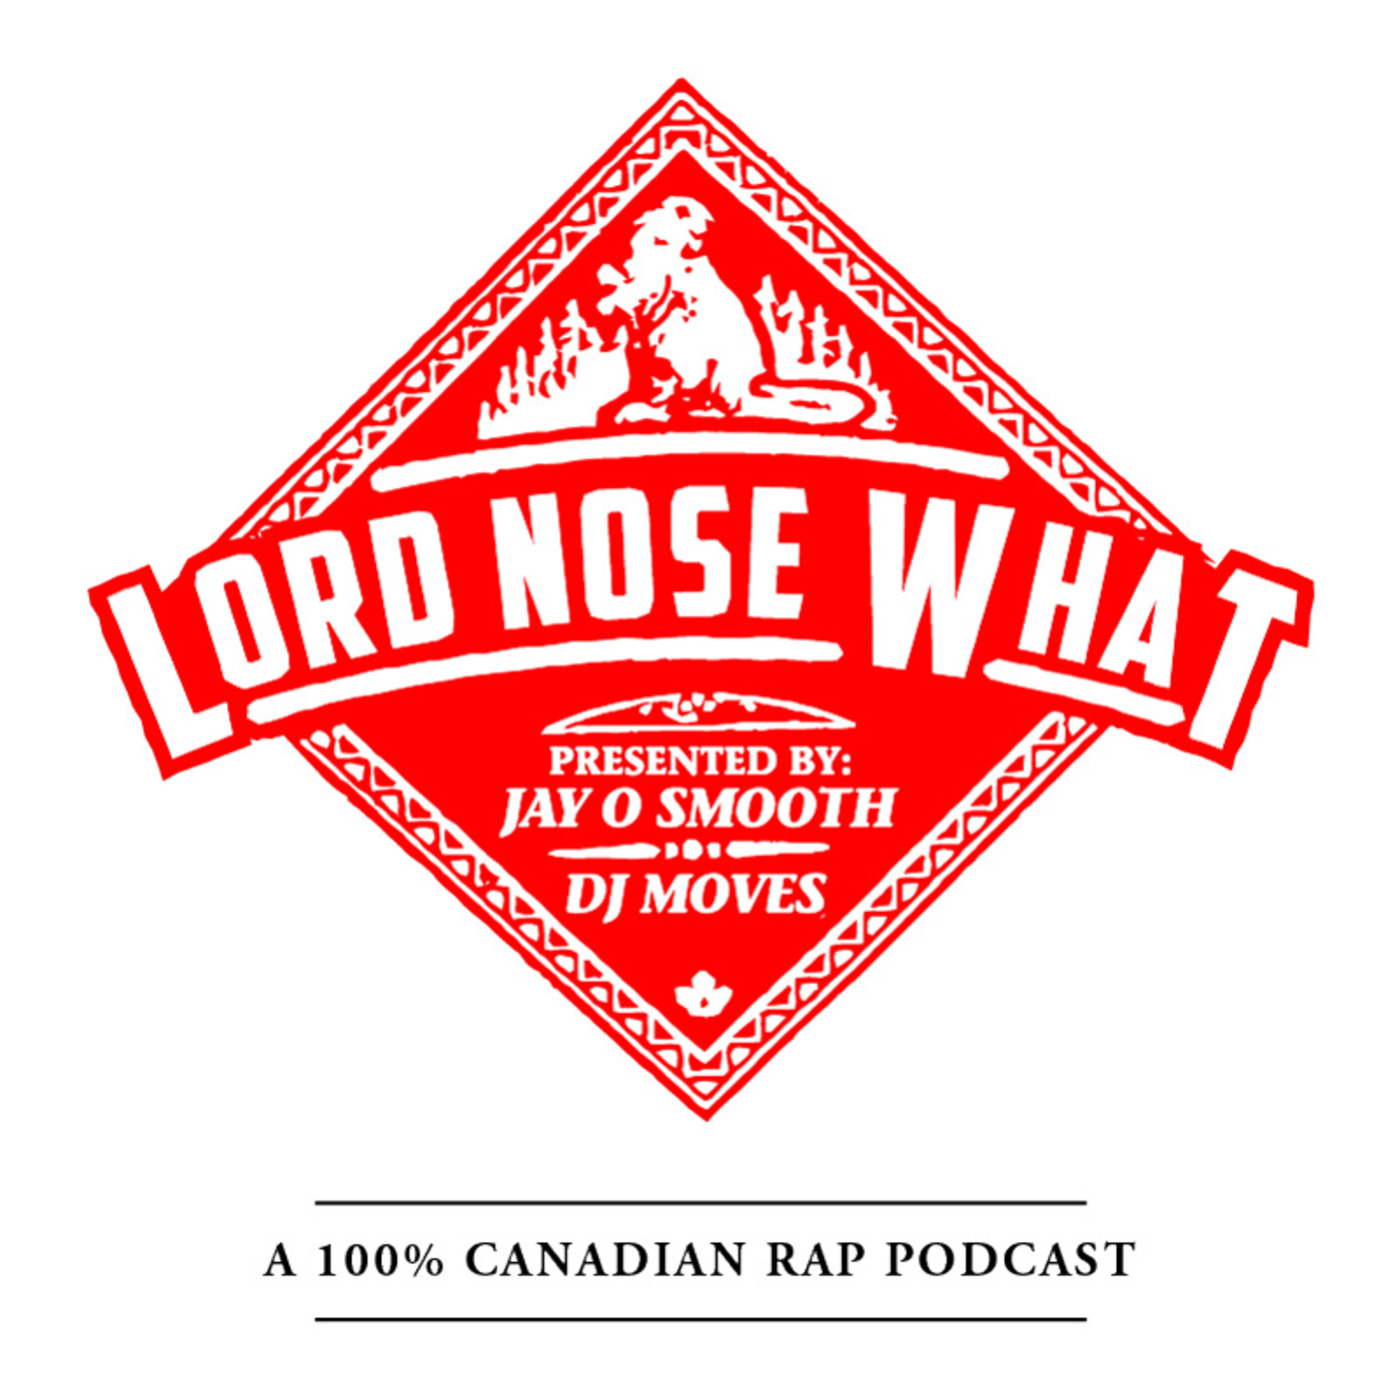 Lord Nose What - Episode 1